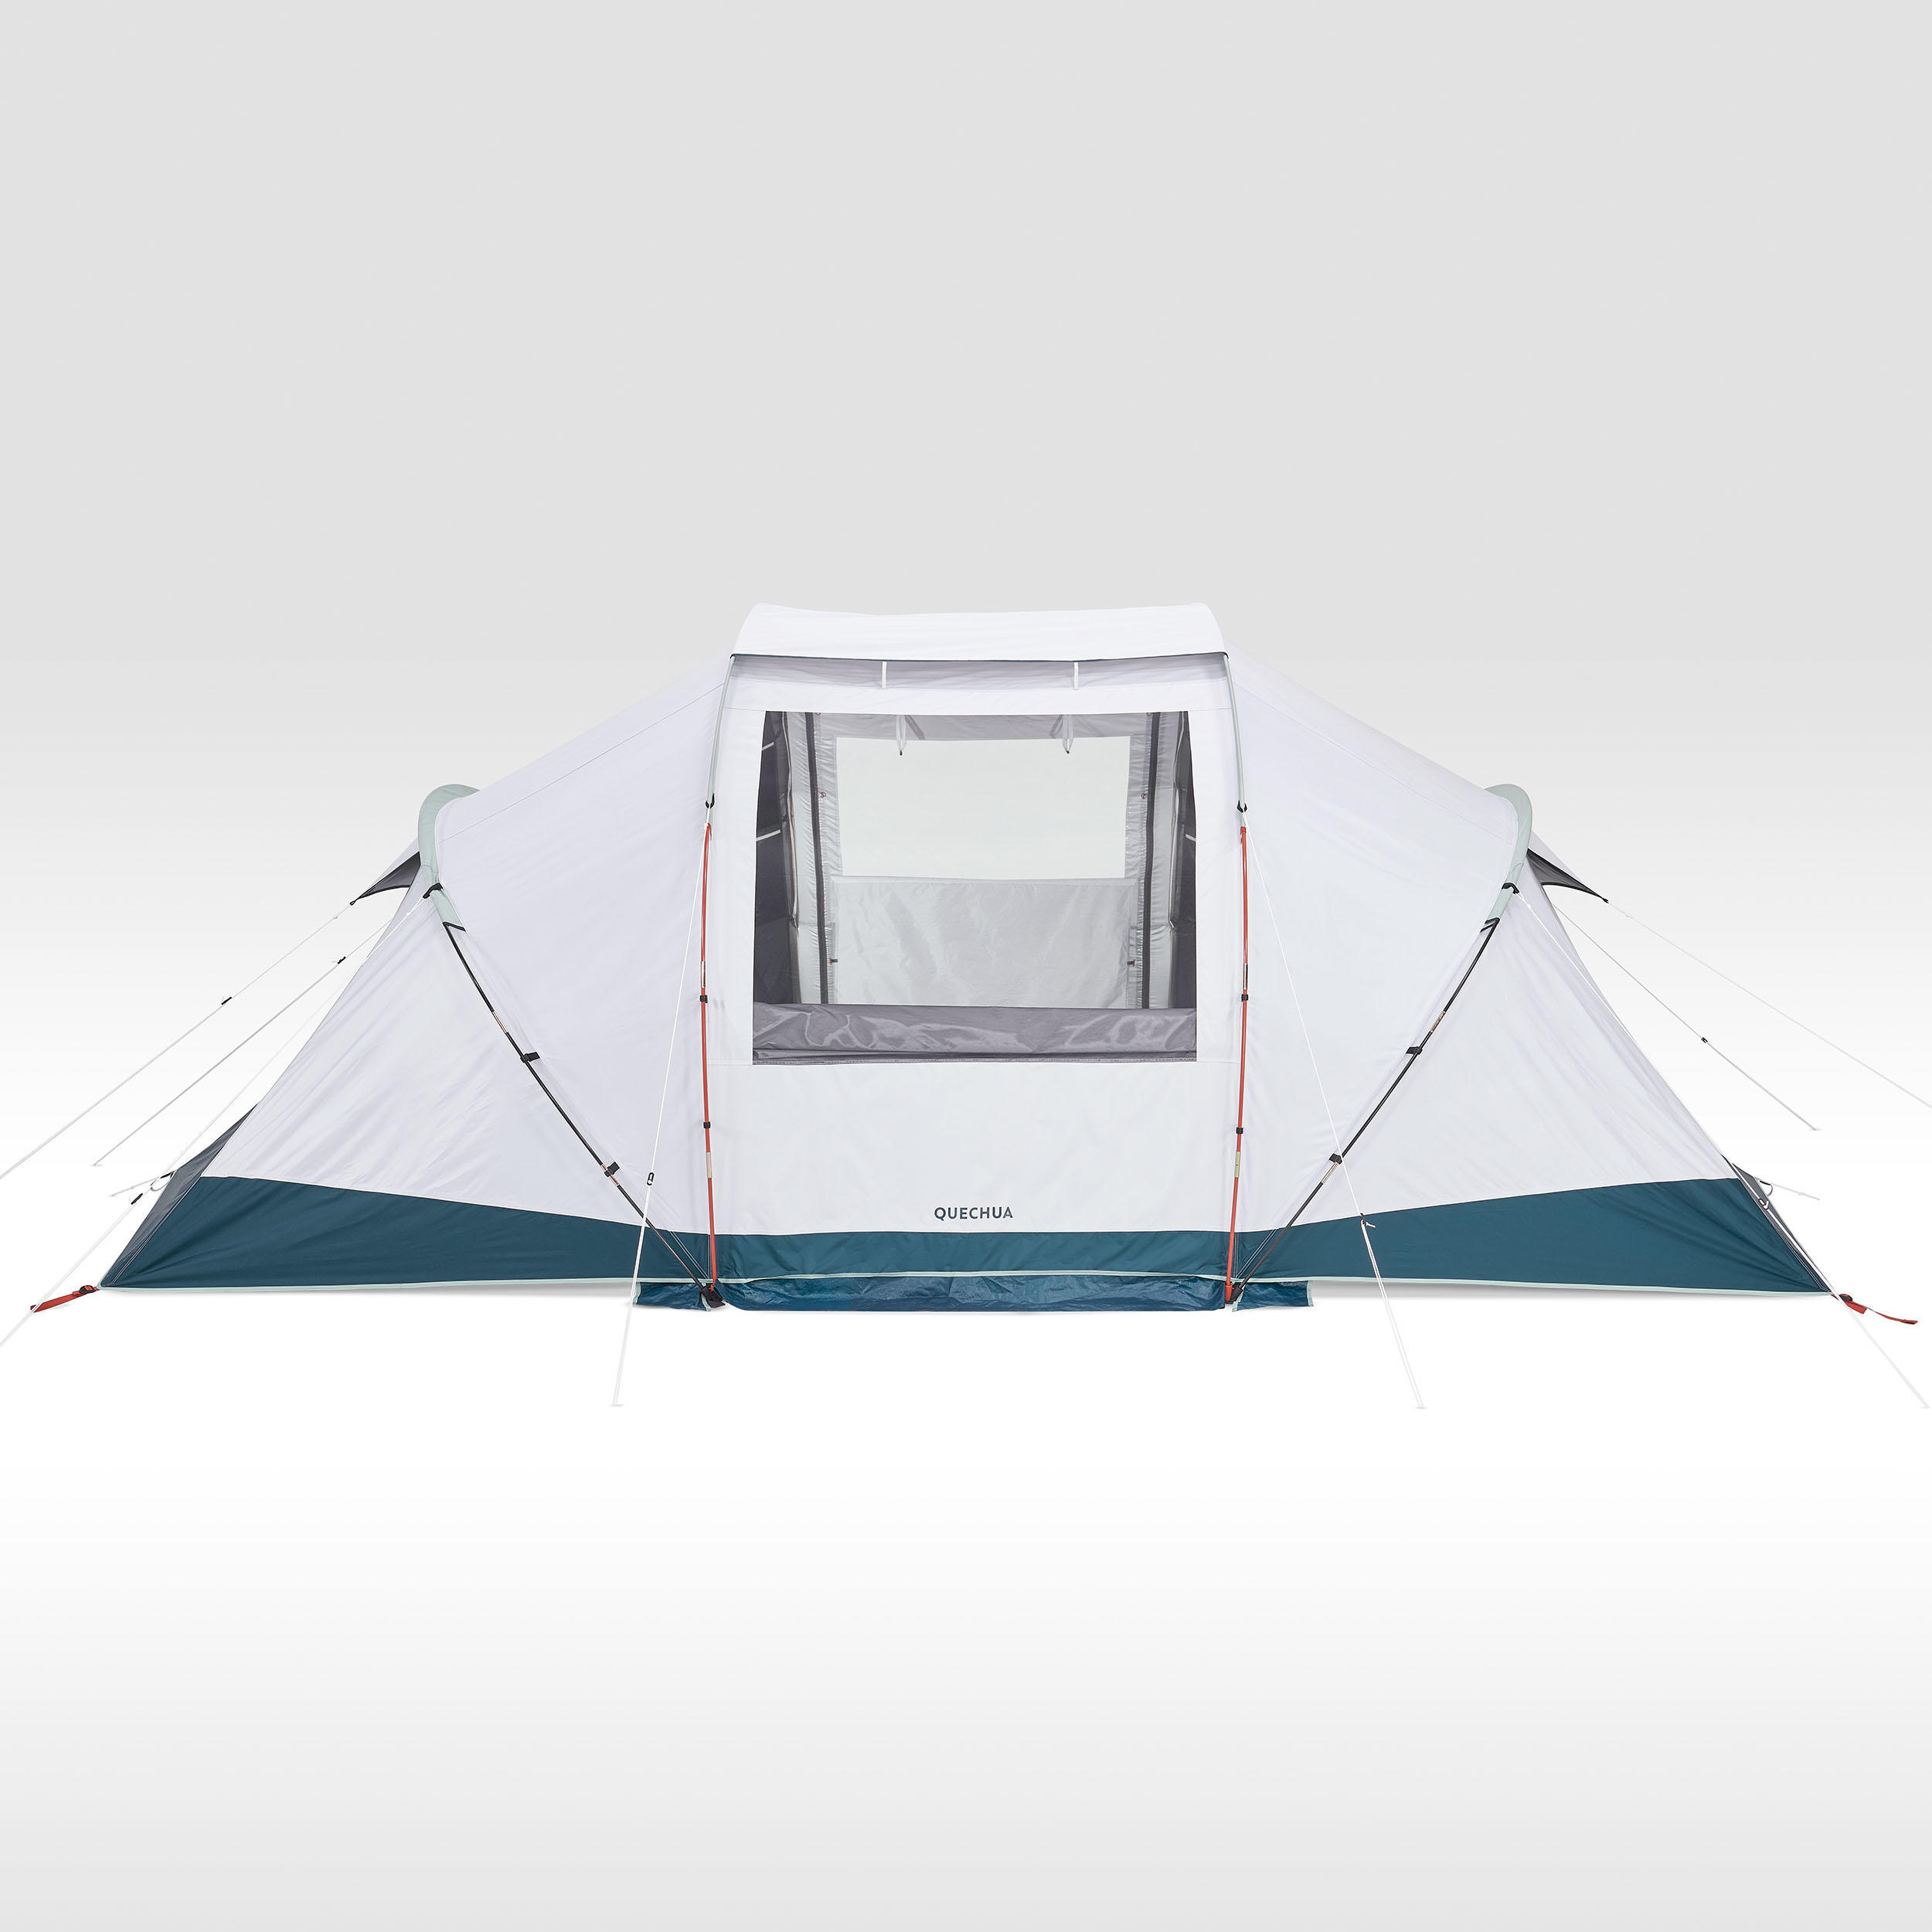 Camping tent with poles - Arpenaz 4.2 F&B - 4 Person - 2 Bedrooms 6/24